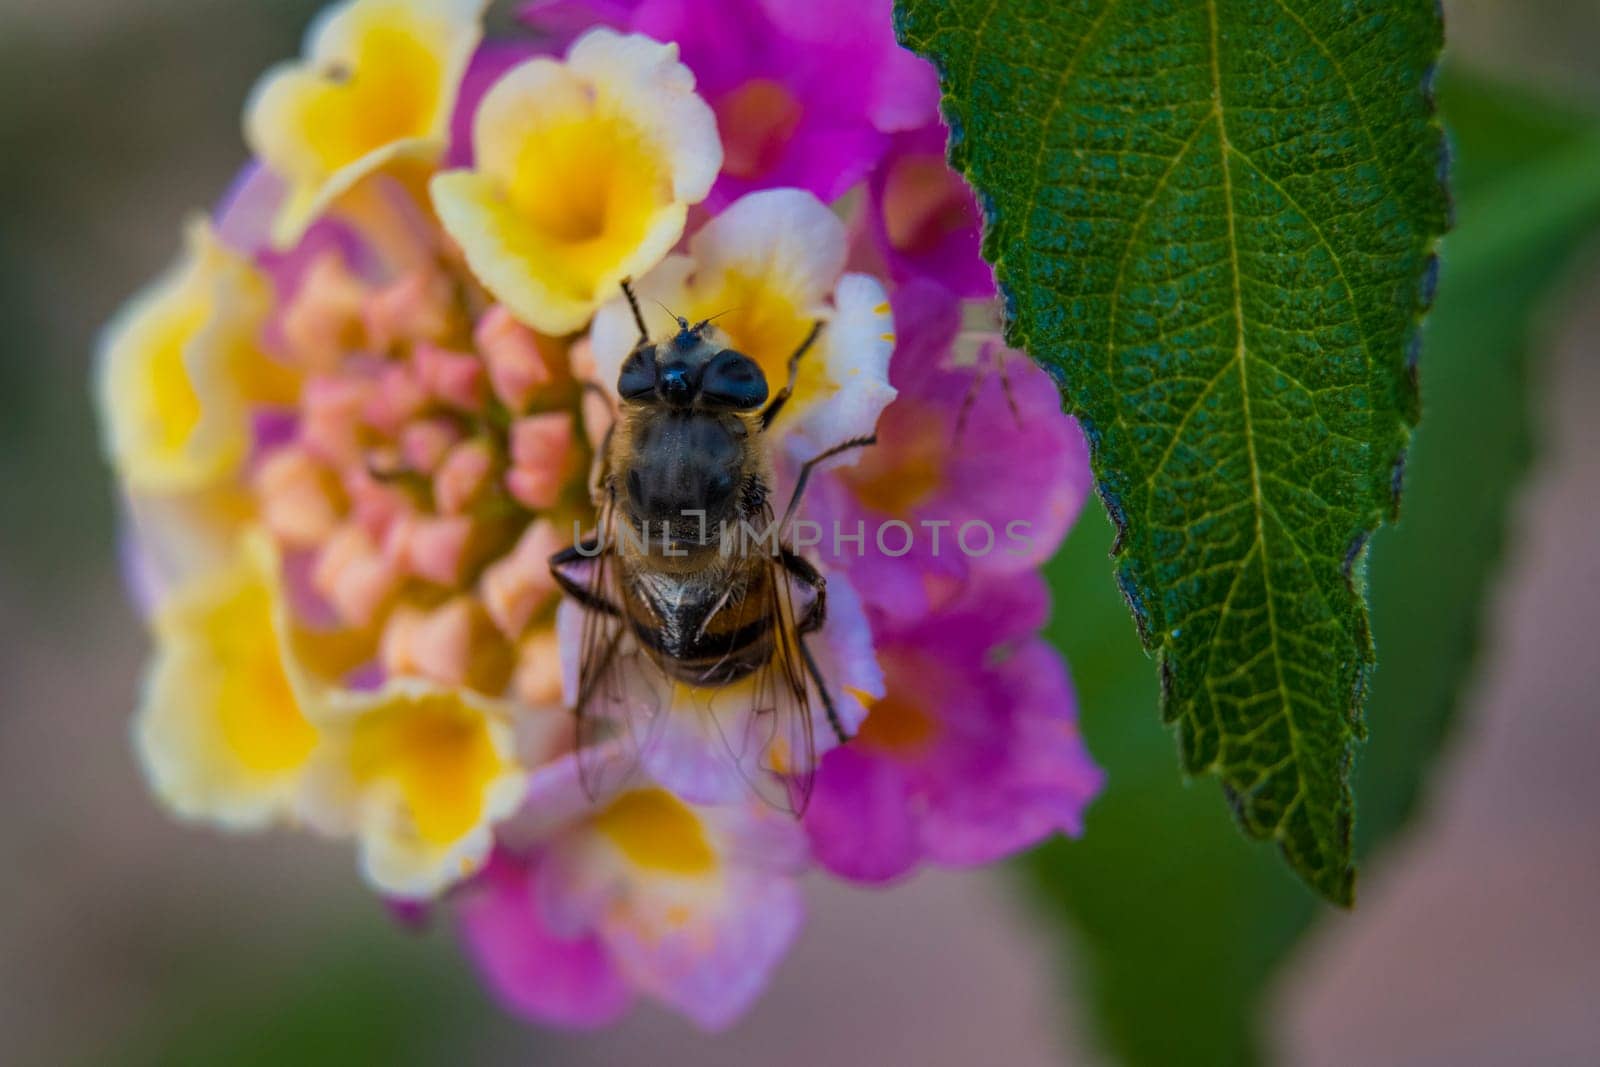 Bee eating nectar on a vivid and colorful close-up of a lantana camara ornamental flower in the garden by kb79